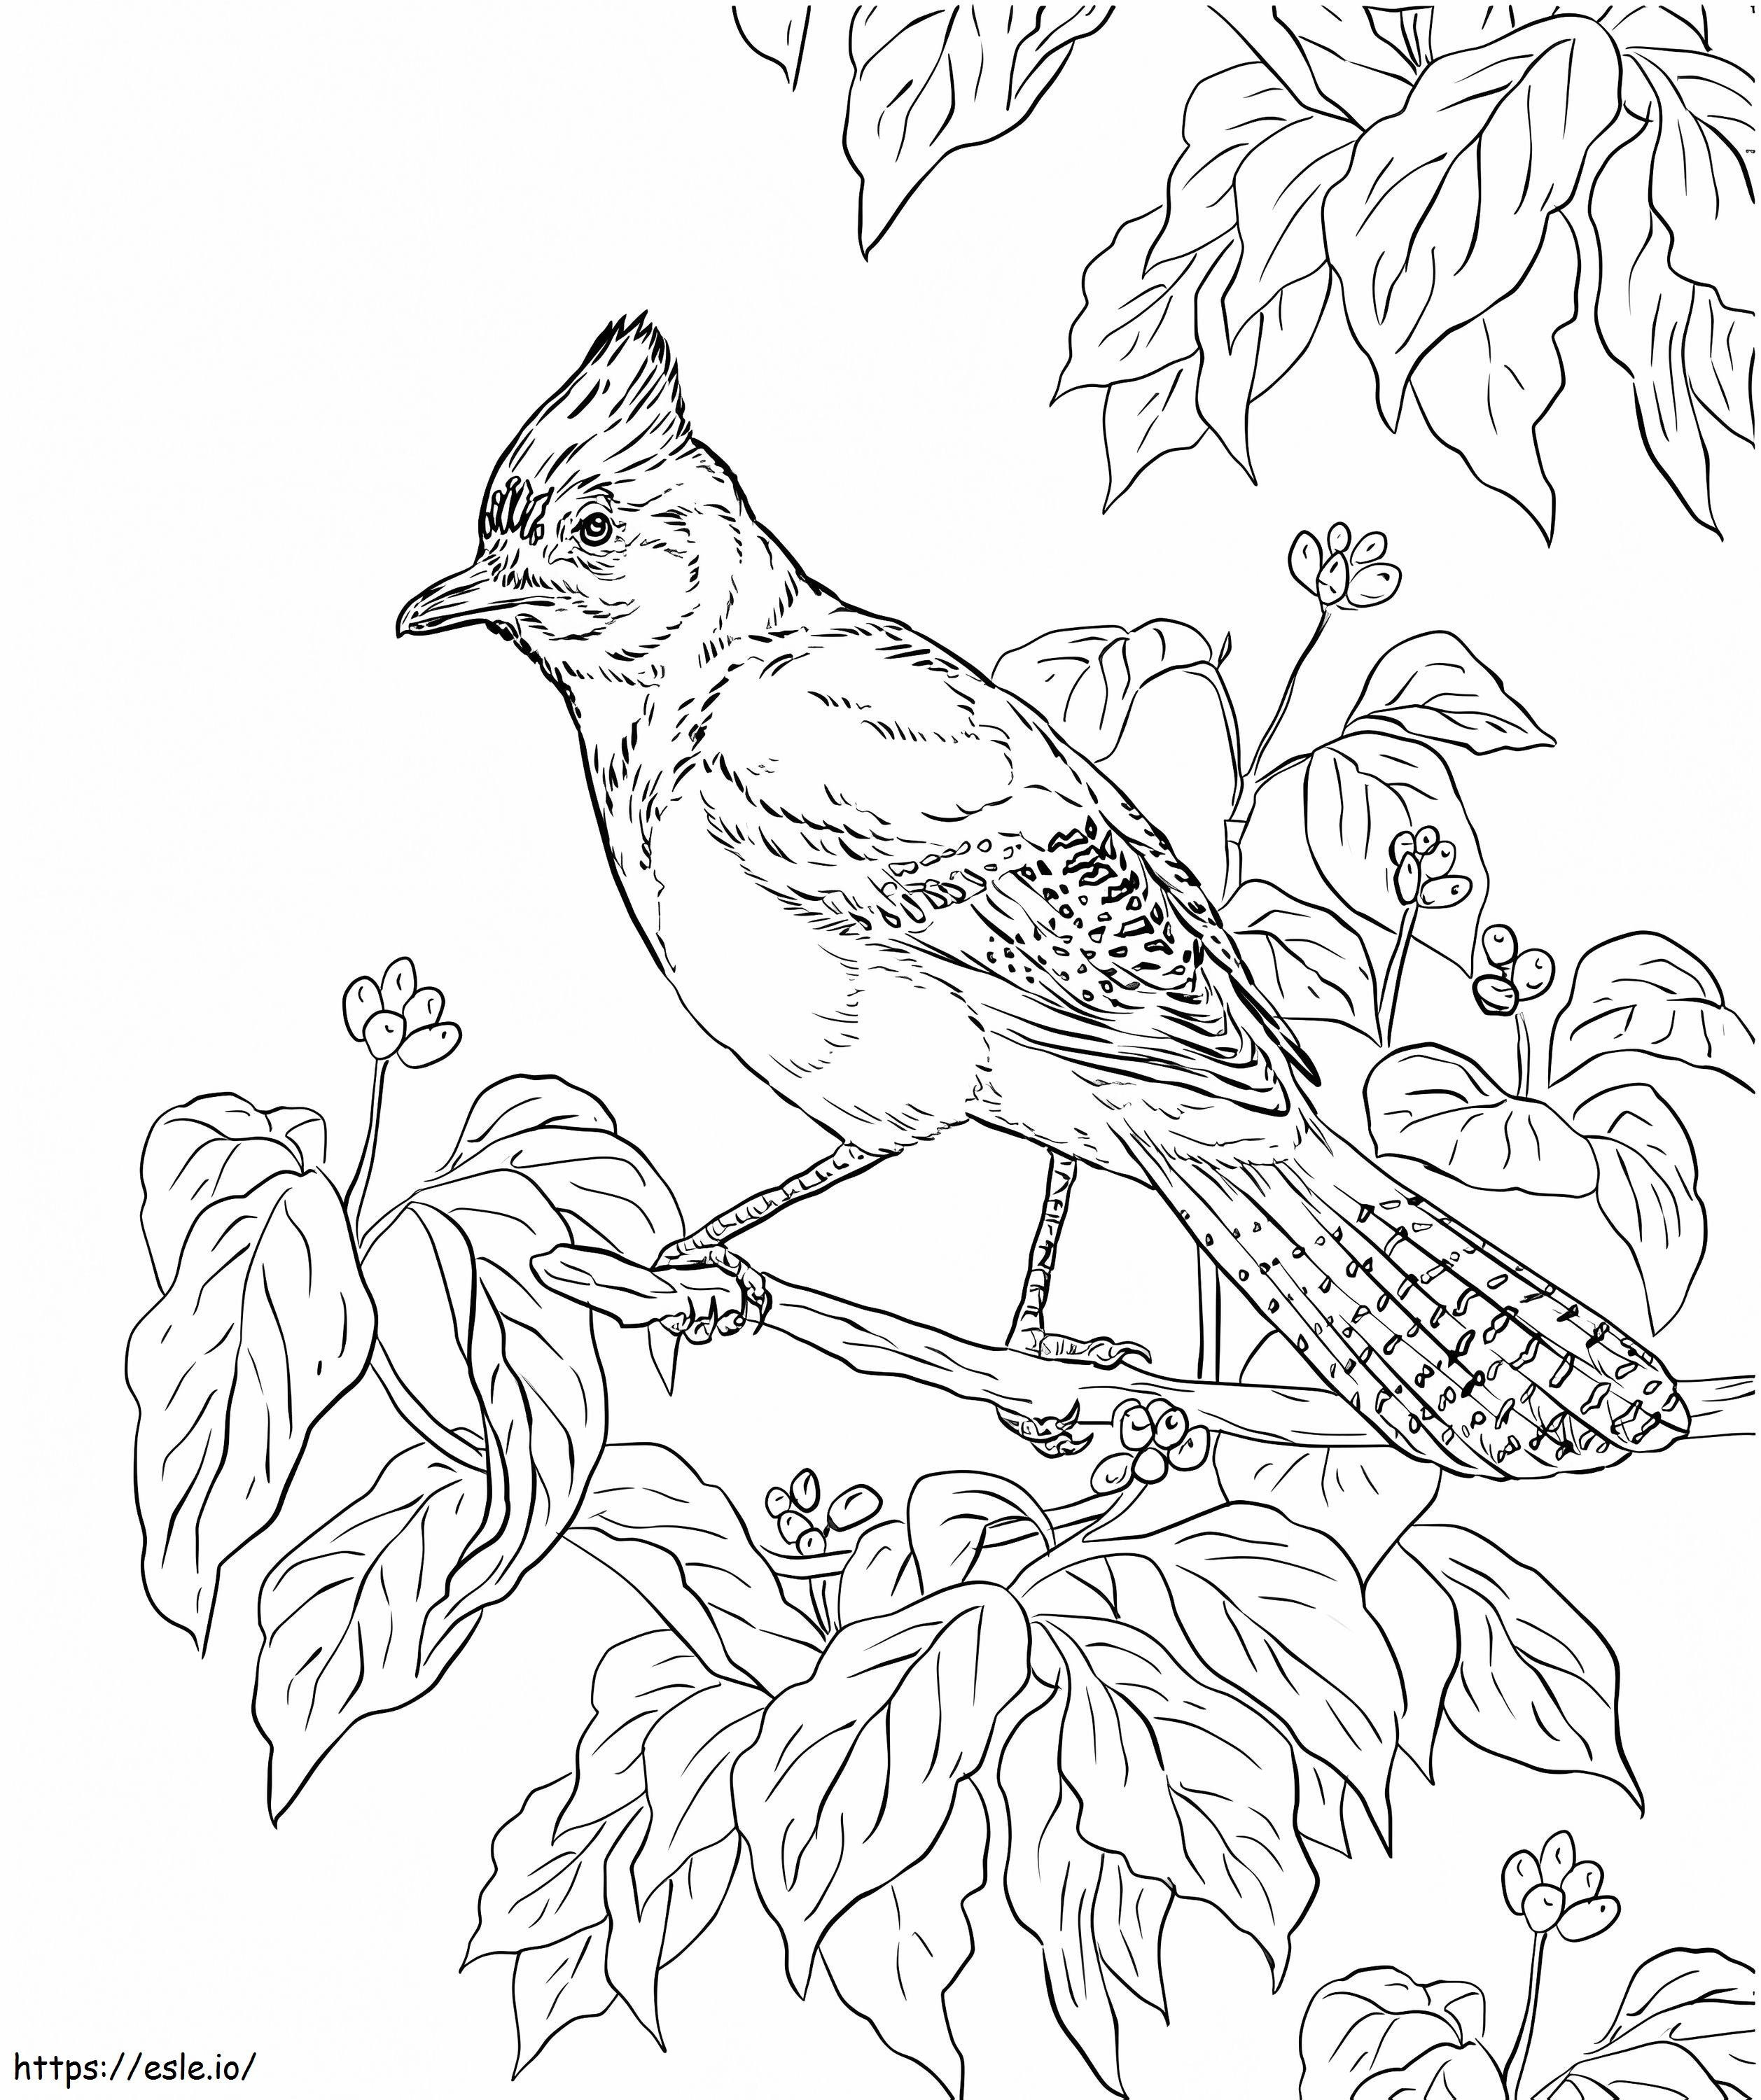 Jays On Tree Branch coloring page